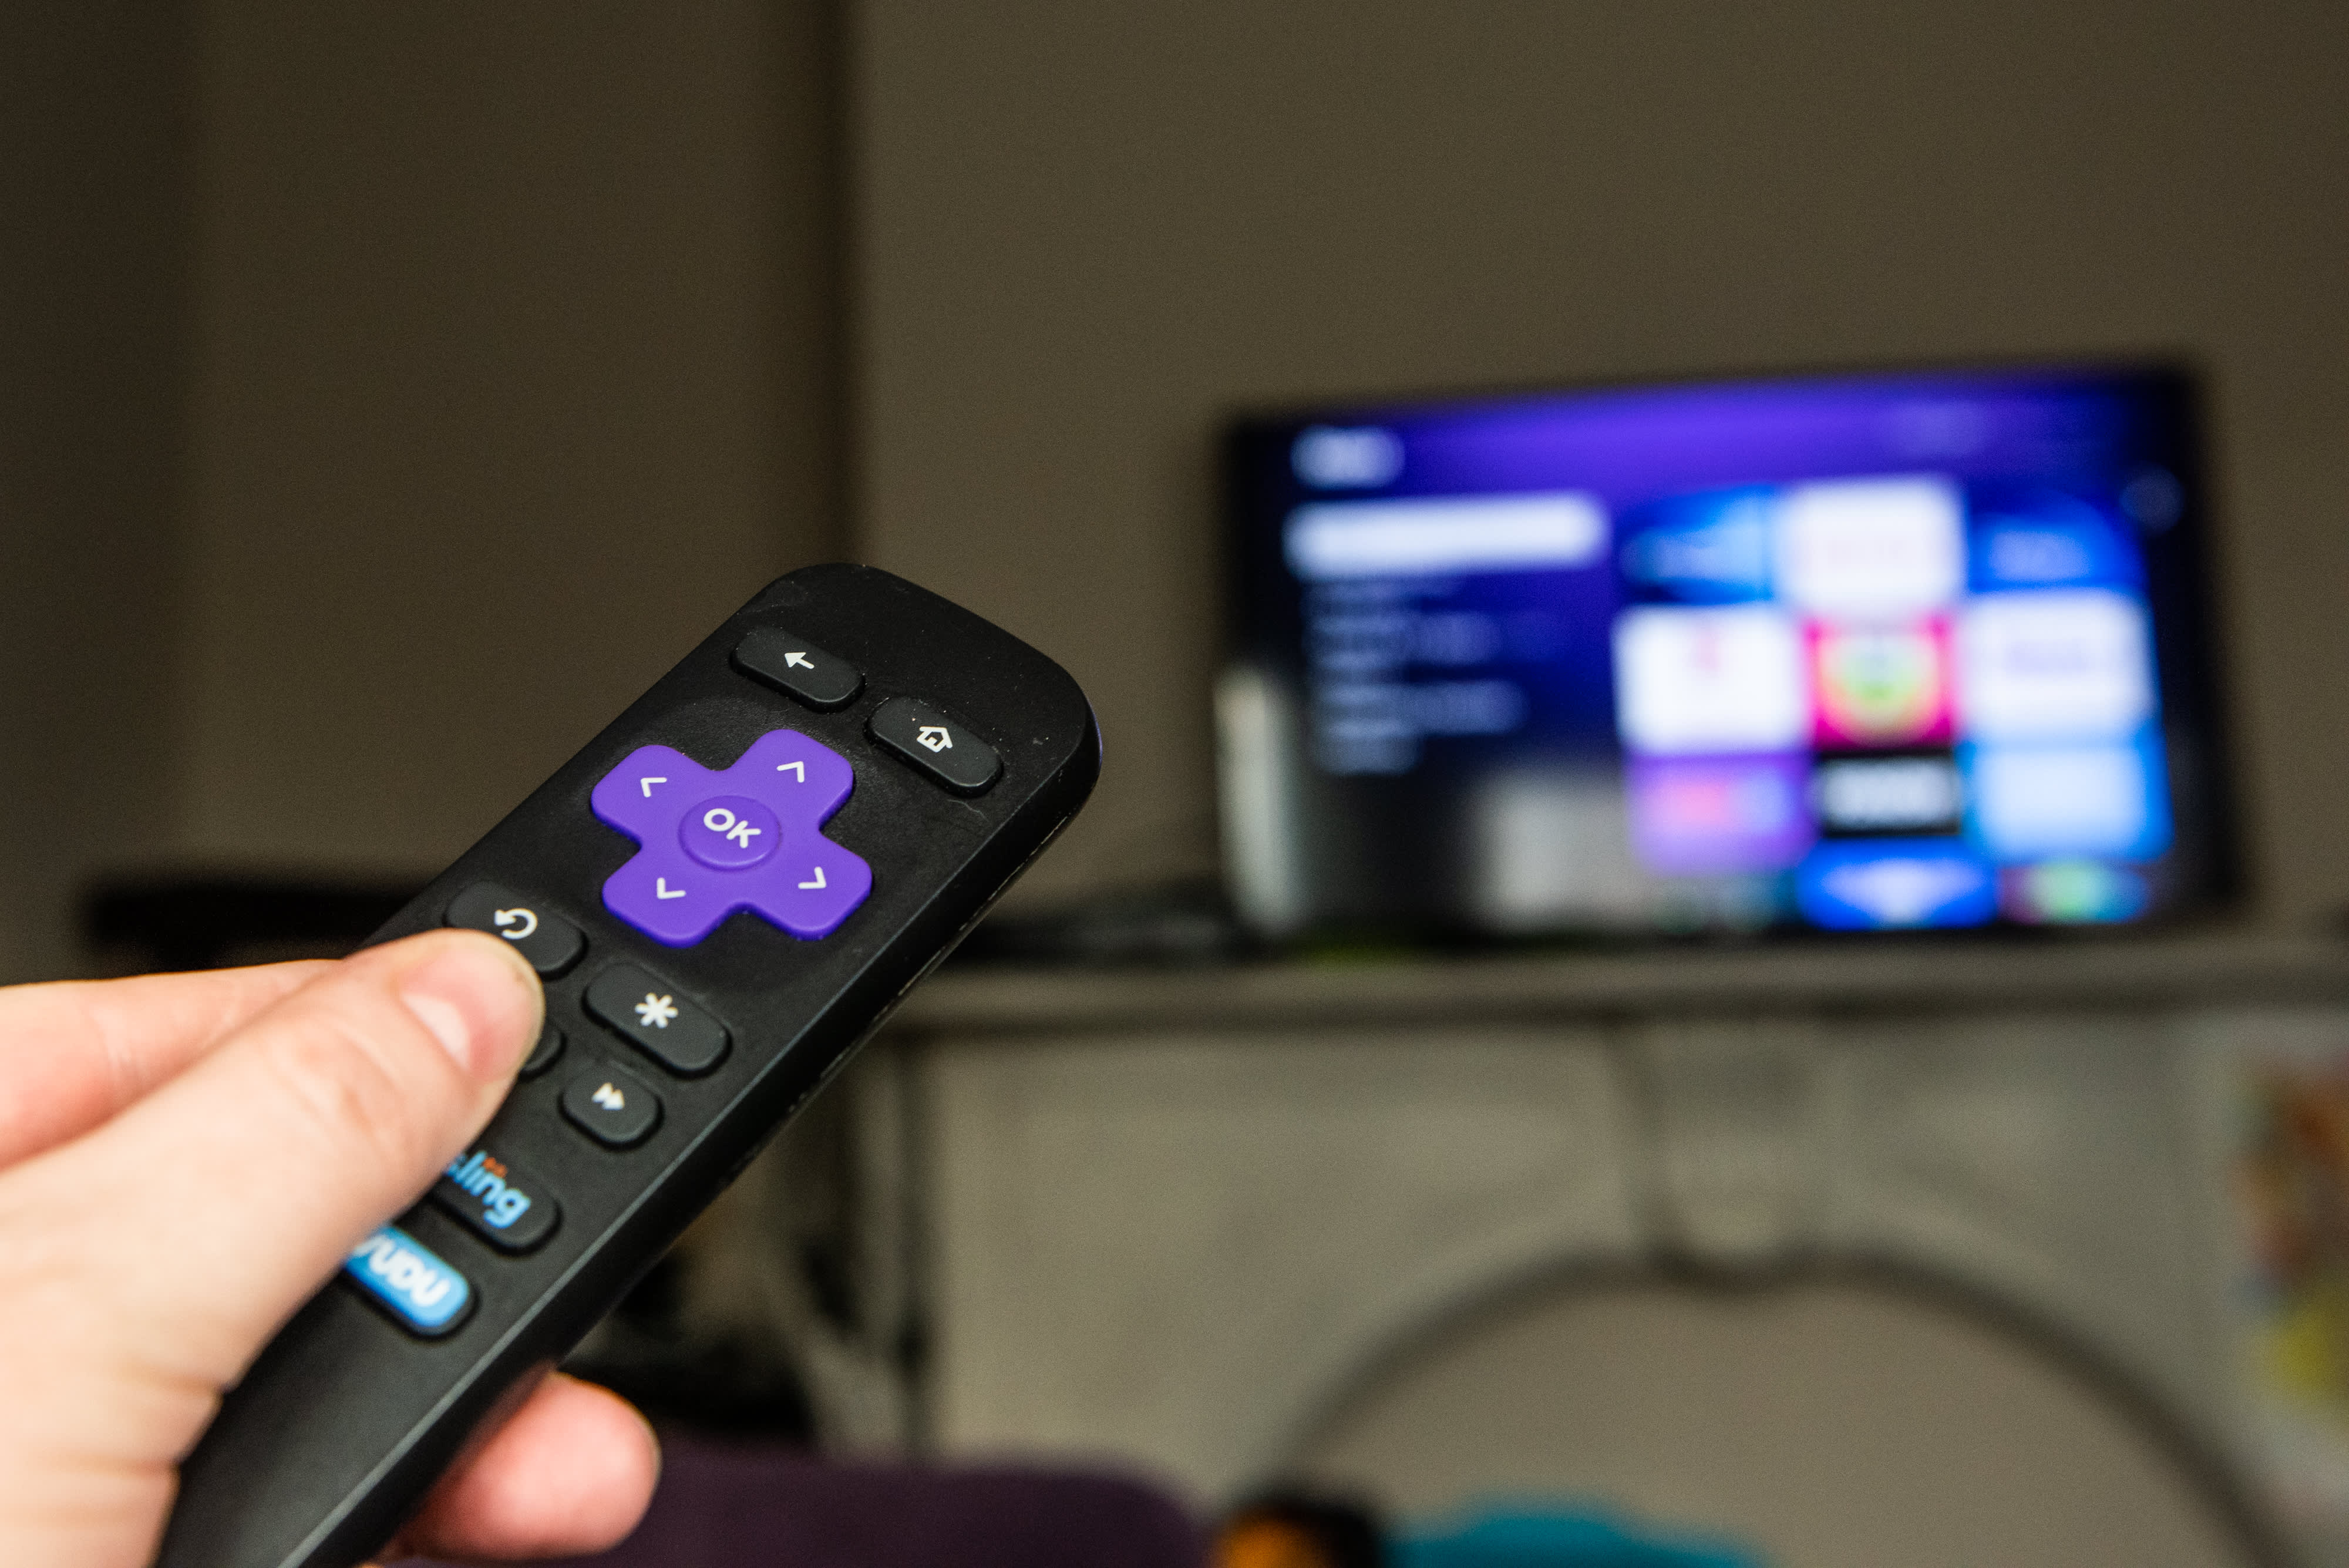 YouTube is leaving Roku. And now the fight between the two companies has caught the attention of members of Congress attempting to push their Big Tech antitrust legislation. After a months-long fight between Roku and YouTube's parent company Google, Google announced Thursday that it would no longer allow Roku customers to download the YouTube or YouTube TV apps to their devices starting Dec.